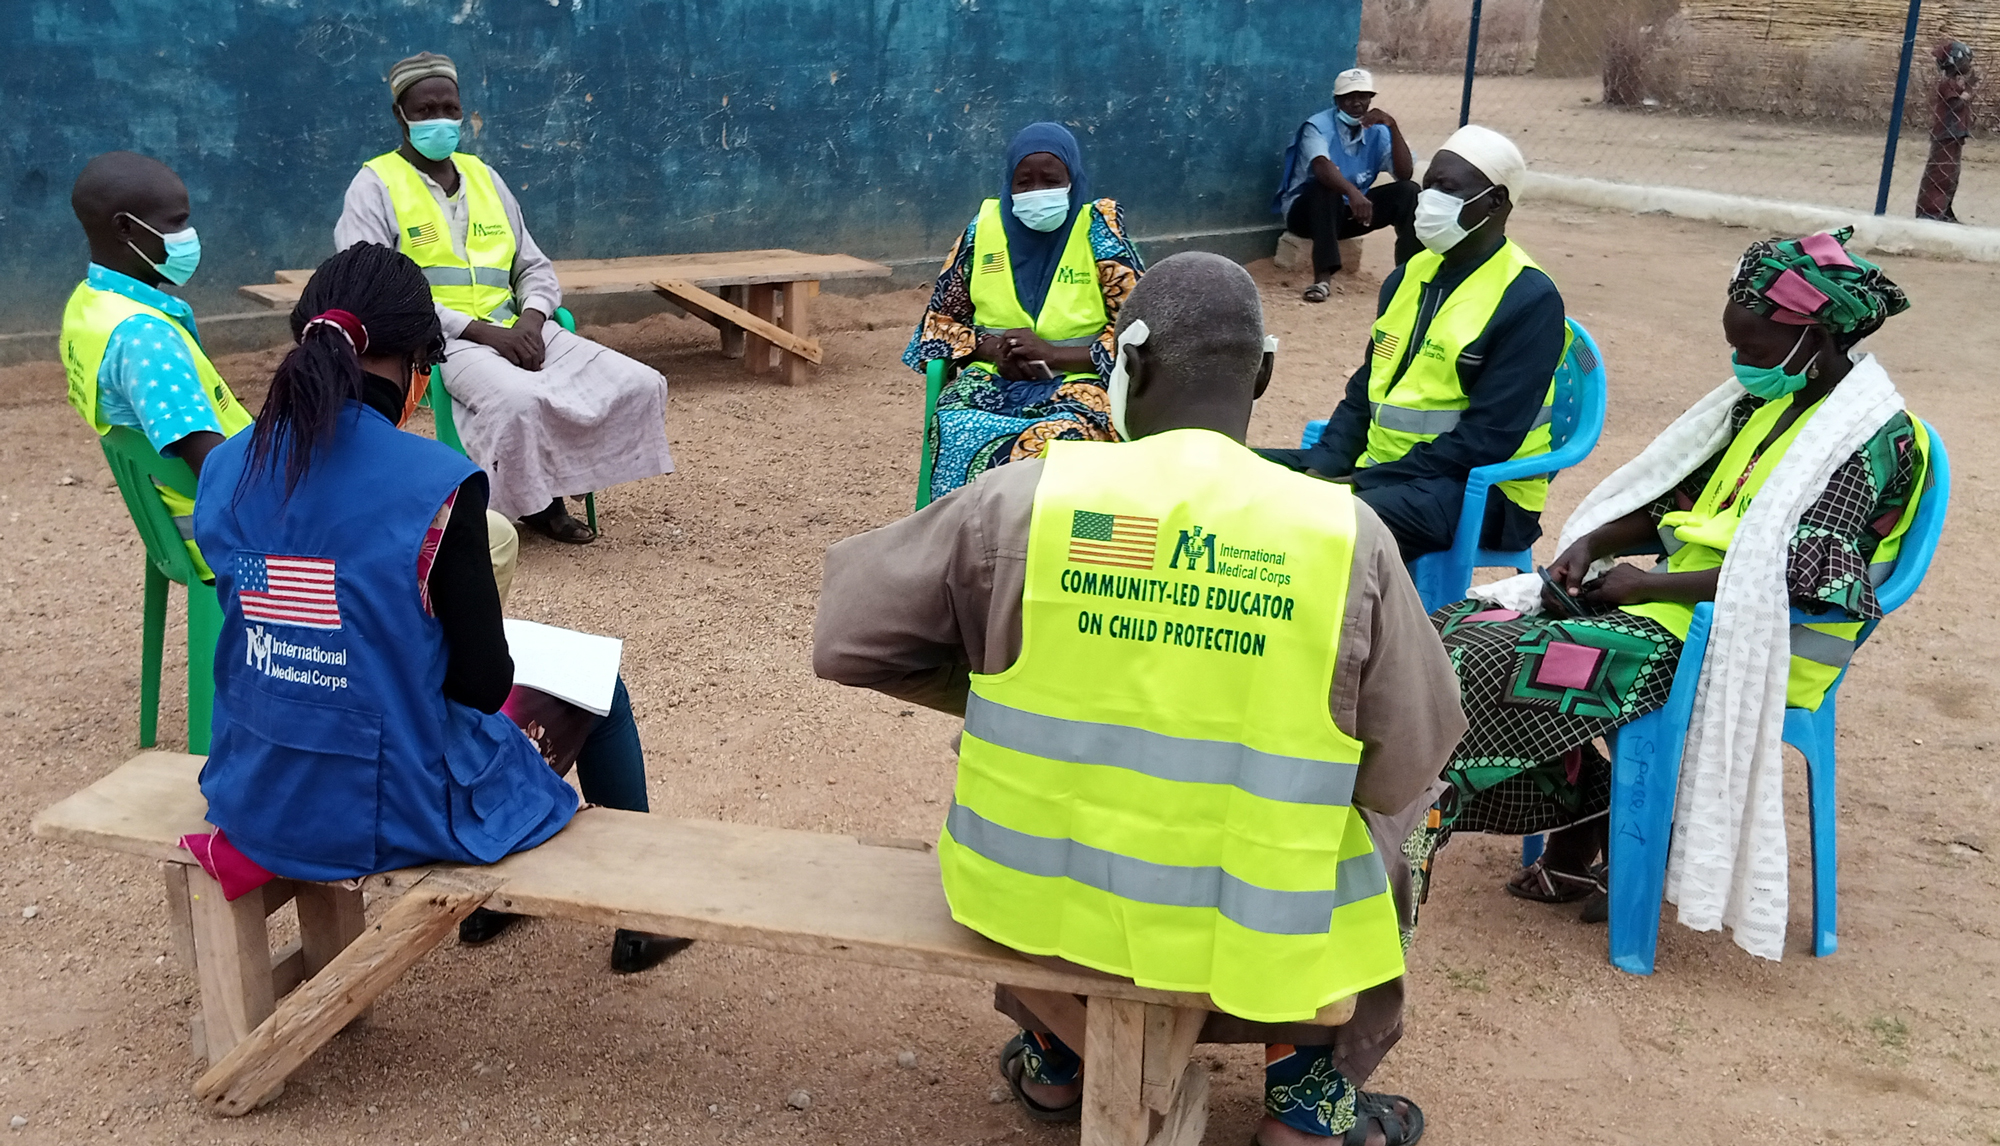 International Medical Corps staff interview six members of the community-based child protection group individually to gather their opinions on the impact of the project, including Ali Mustapha, Obadia Aga, Fatima Mohamed, Rahila Ayuba, Samuel Pardapa and William Peter.